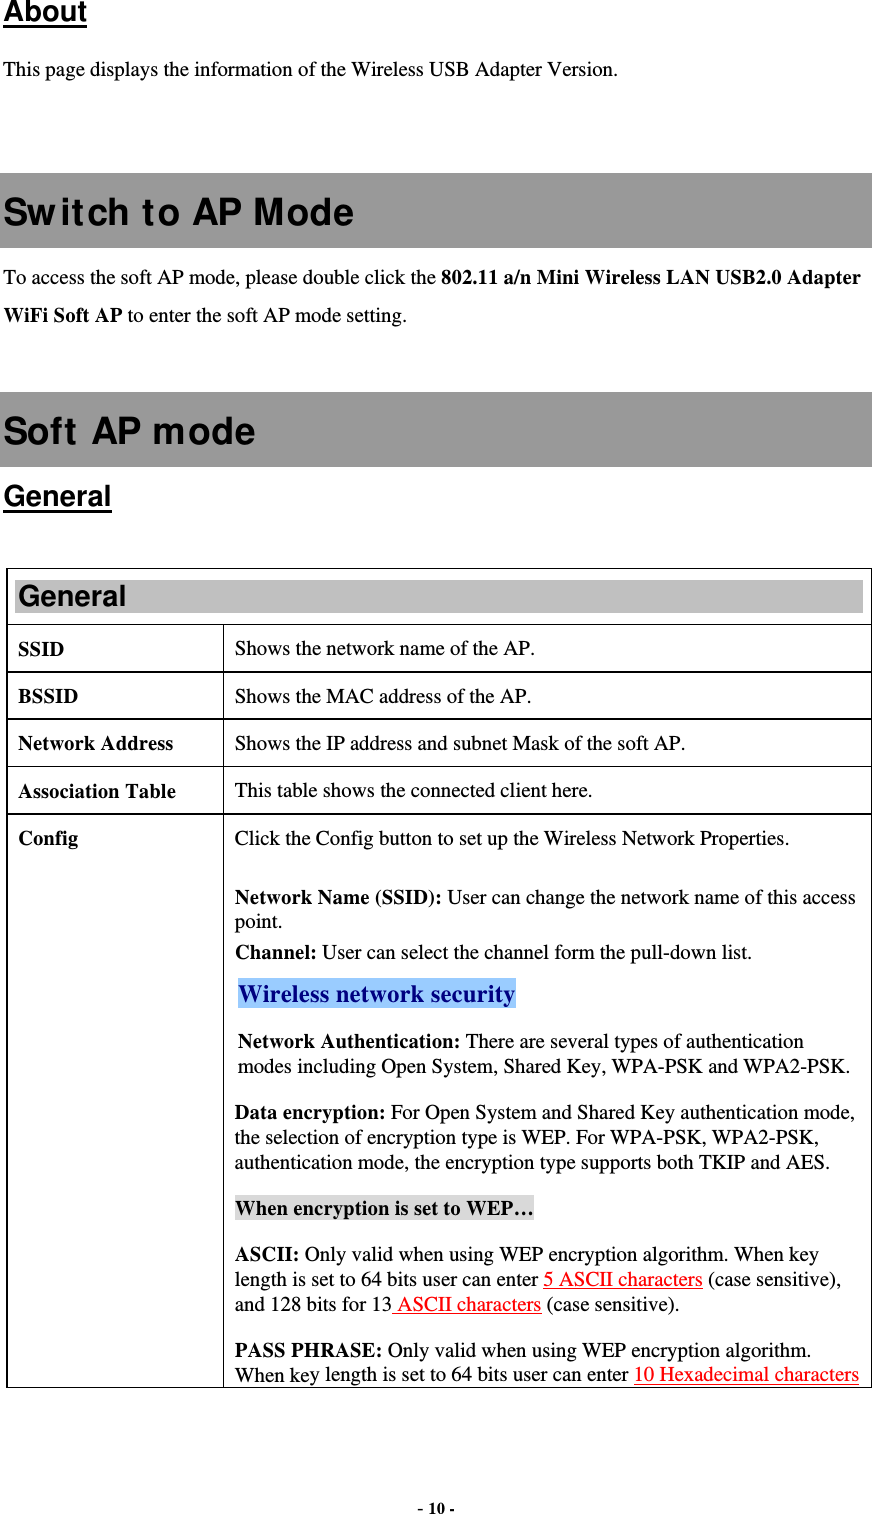  - 10 -  About This page displays the information of the Wireless USB Adapter Version.   Switch to AP Mode To access the soft AP mode, please double click the 802.11 a/n Mini Wireless LAN USB2.0 Adapter WiFi Soft AP to enter the soft AP mode setting.  Soft AP mode General  General SSID   Shows the network name of the AP. BSSID  Shows the MAC address of the AP. Network Address  Shows the IP address and subnet Mask of the soft AP. Association Table  This table shows the connected client here. Config  Click the Config button to set up the Wireless Network Properties.  Network Name (SSID): User can change the network name of this access point. Channel: User can select the channel form the pull-down list. Wireless network security Network Authentication: There are several types of authentication modes including Open System, Shared Key, WPA-PSK and WPA2-PSK. Data encryption: For Open System and Shared Key authentication mode, the selection of encryption type is WEP. For WPA-PSK, WPA2-PSK, authentication mode, the encryption type supports both TKIP and AES. When encryption is set to WEP… ASCII: Only valid when using WEP encryption algorithm. When key length is set to 64 bits user can enter 5 ASCII characters (case sensitive), and 128 bits for 13 ASCII characters (case sensitive). PASS PHRASE: Only valid when using WEP encryption algorithm. When key length is set to 64 bits user can enter 10 Hexadecimal characters